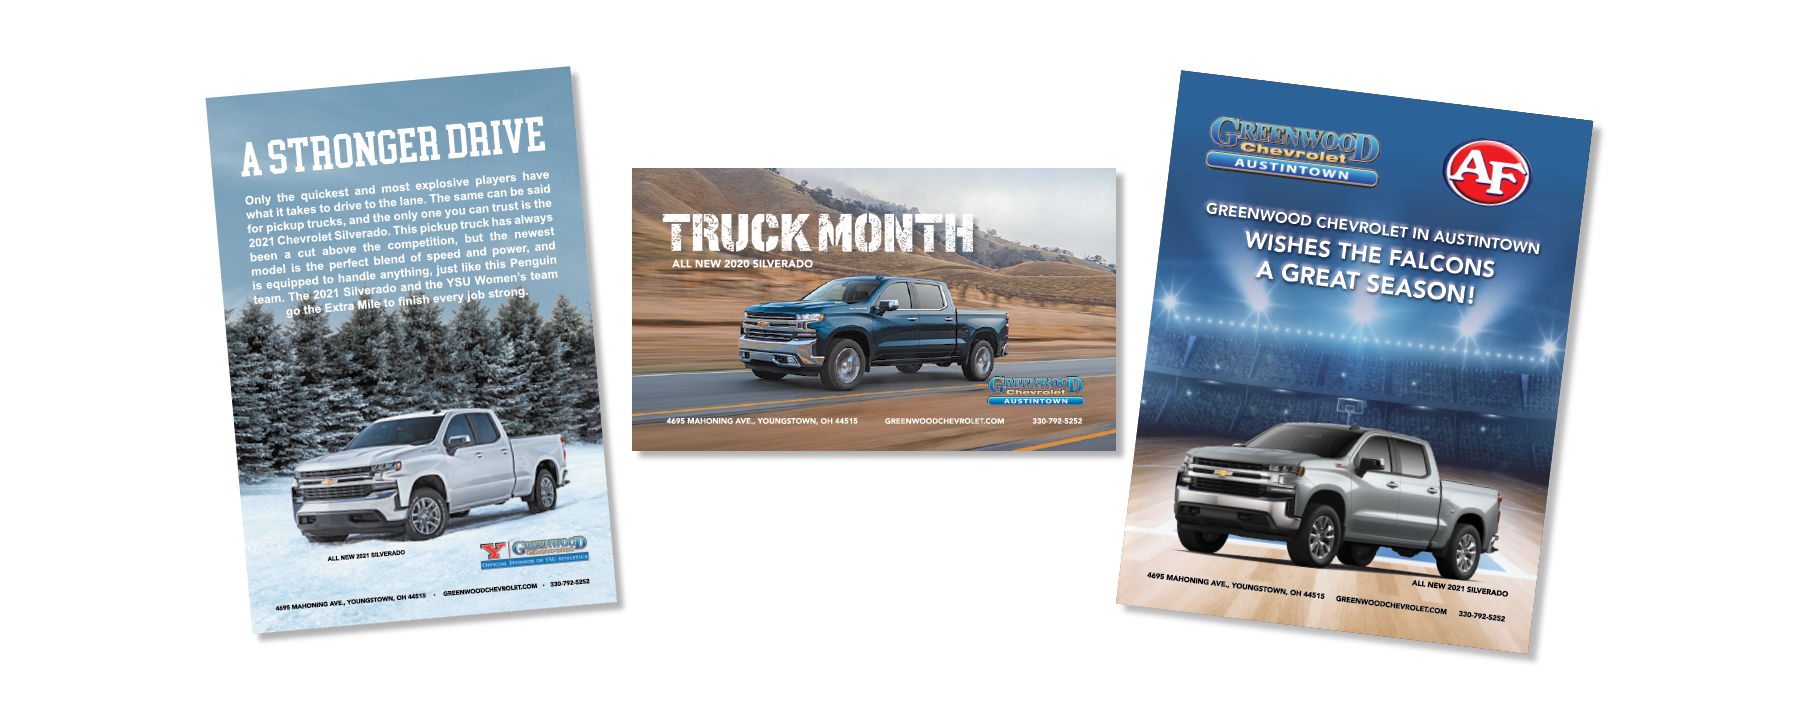 Greenwood Chevrolet Marketing collateral